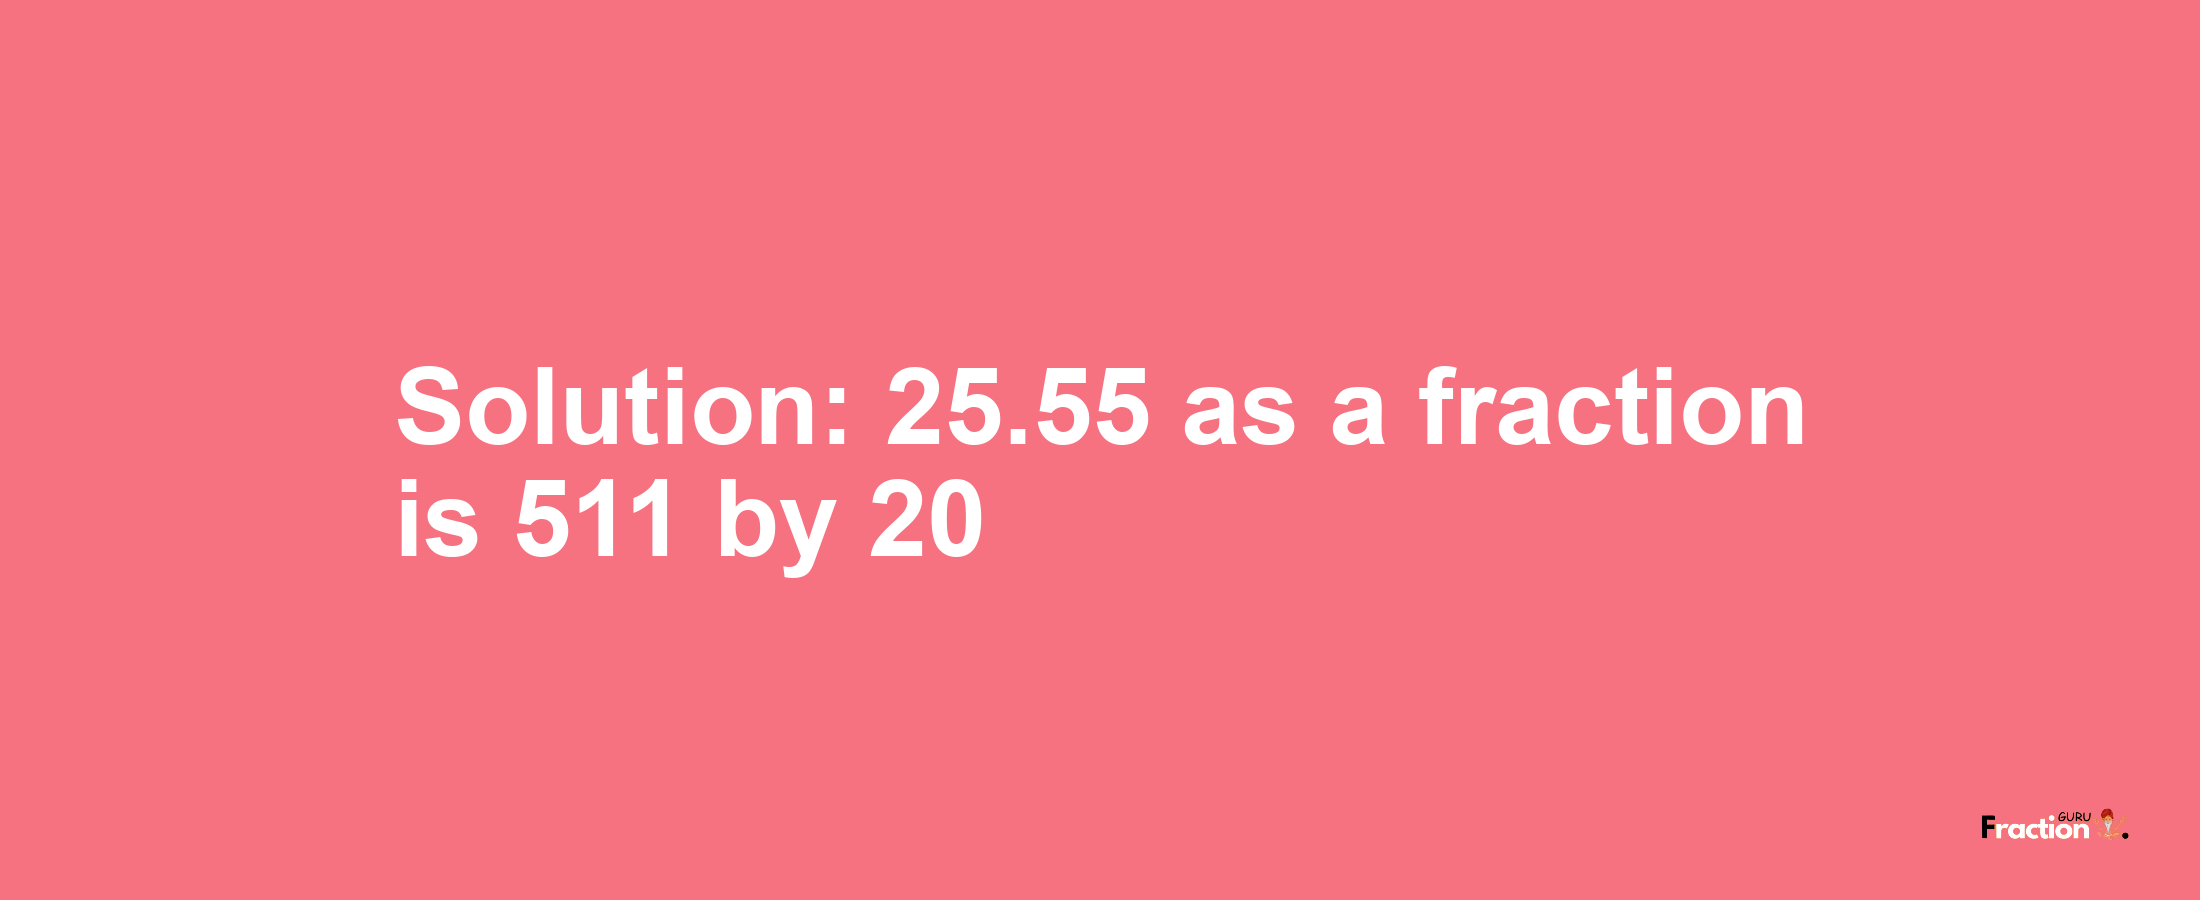 Solution:25.55 as a fraction is 511/20